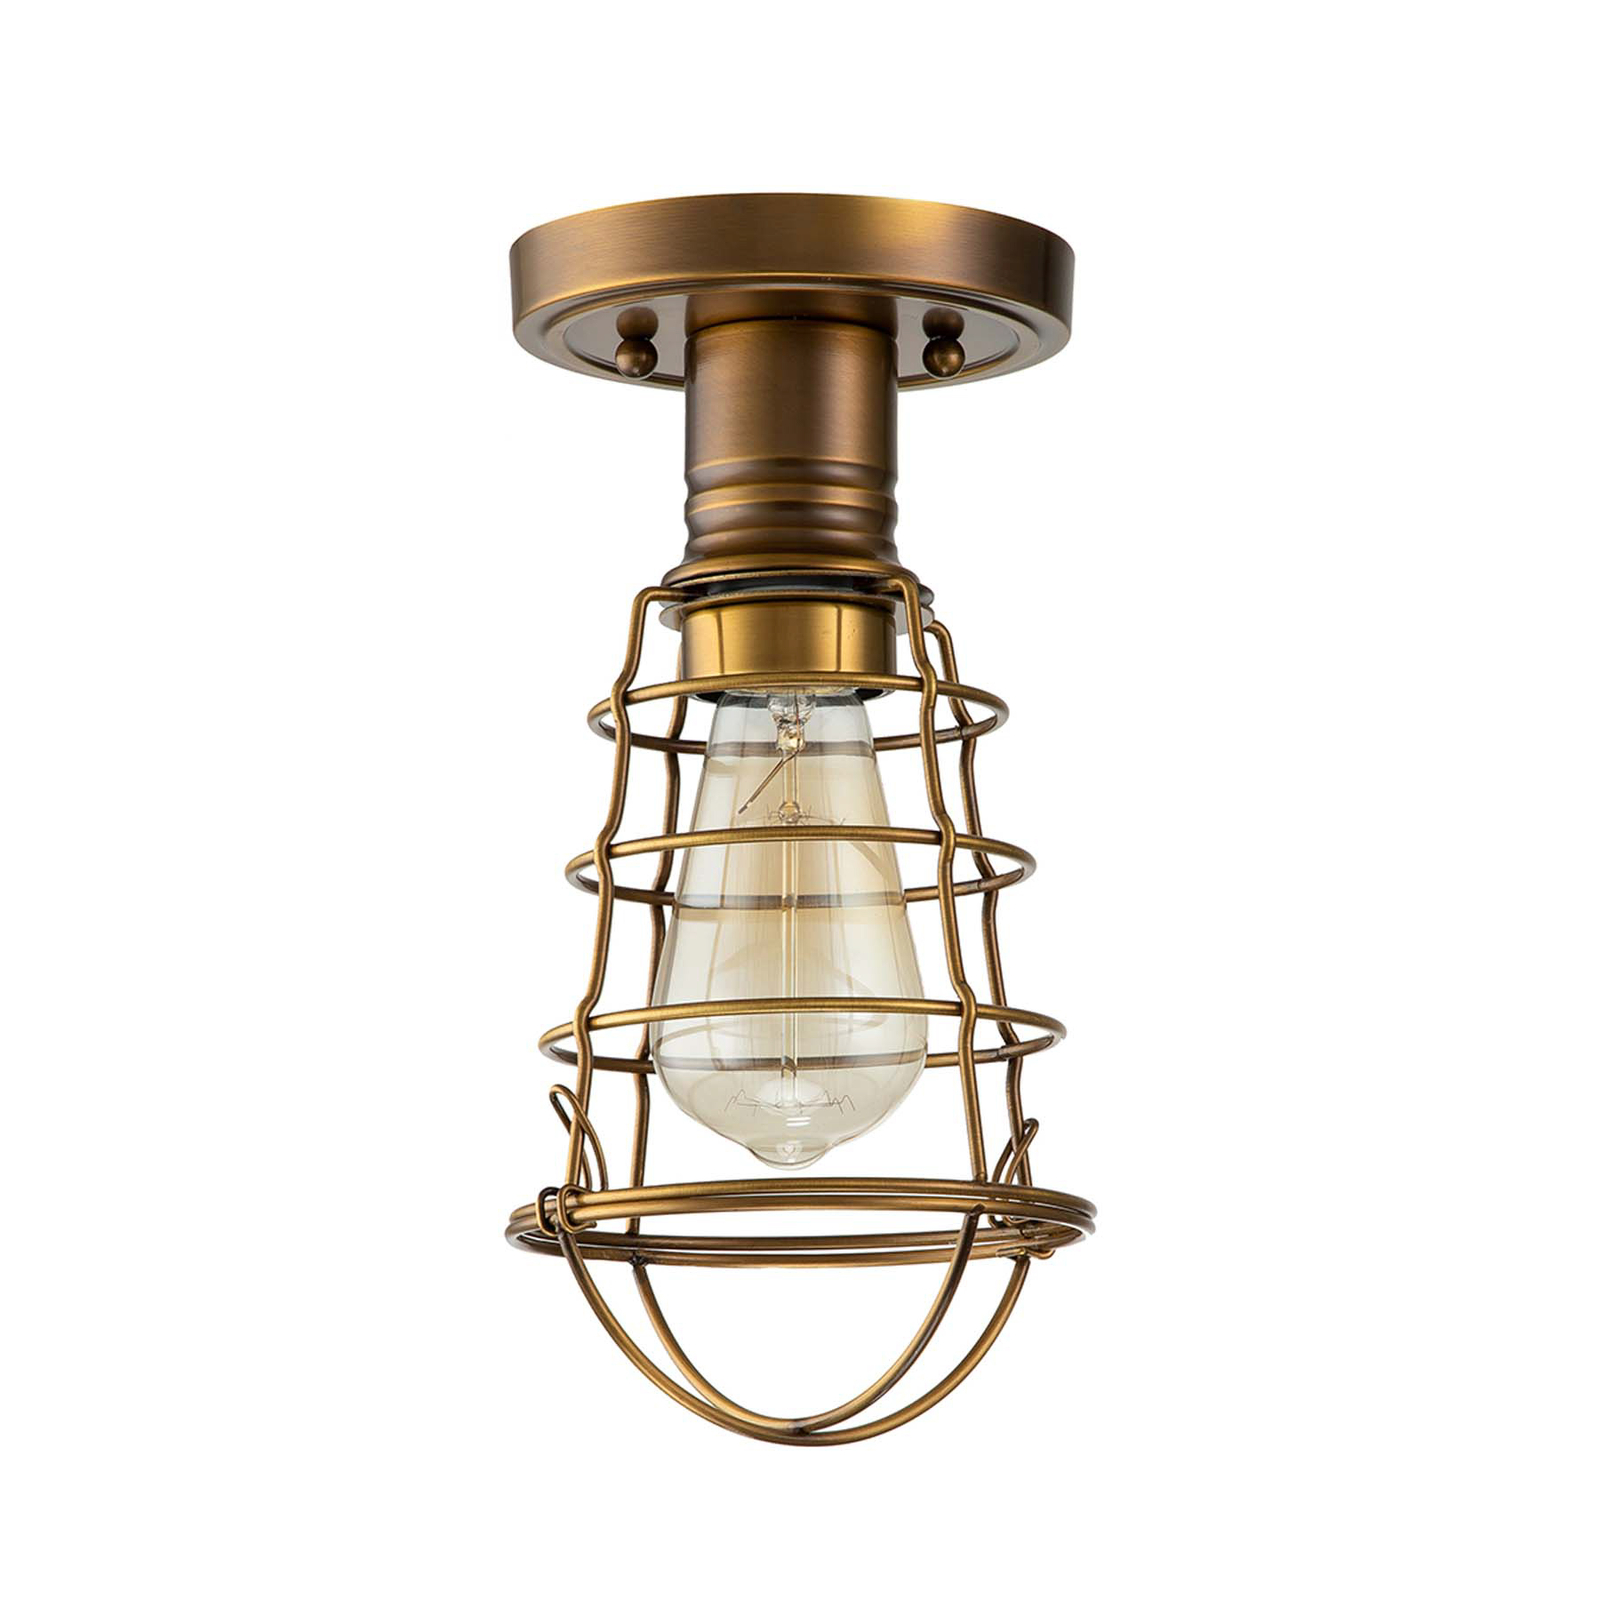 Mite ceiling light with metal cage, antique brass